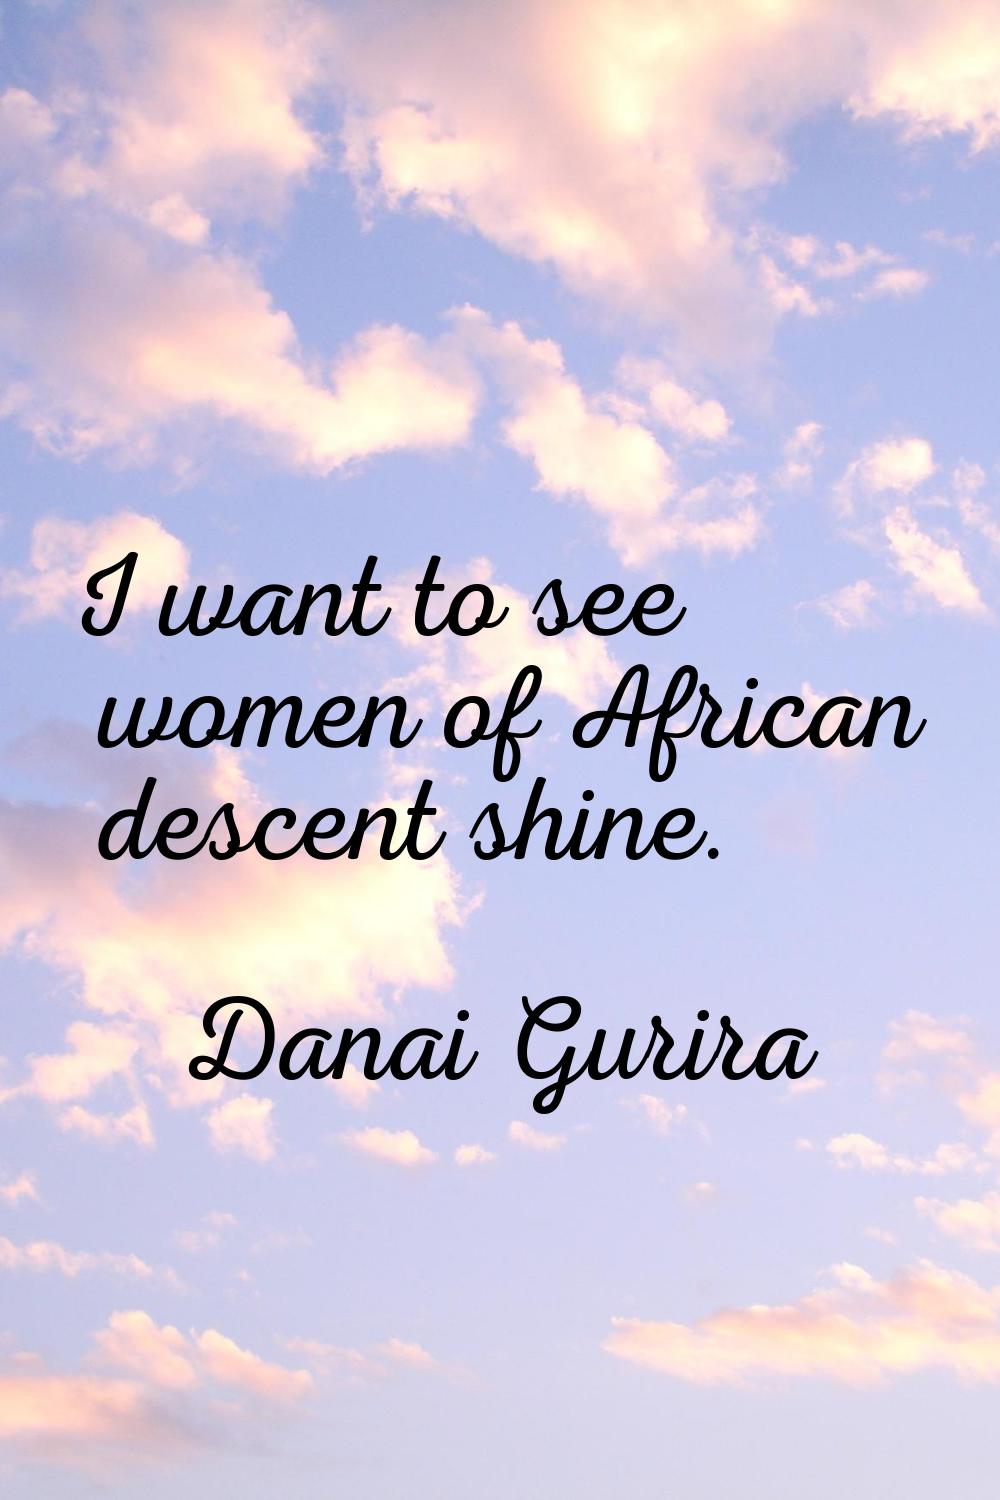 I want to see women of African descent shine.